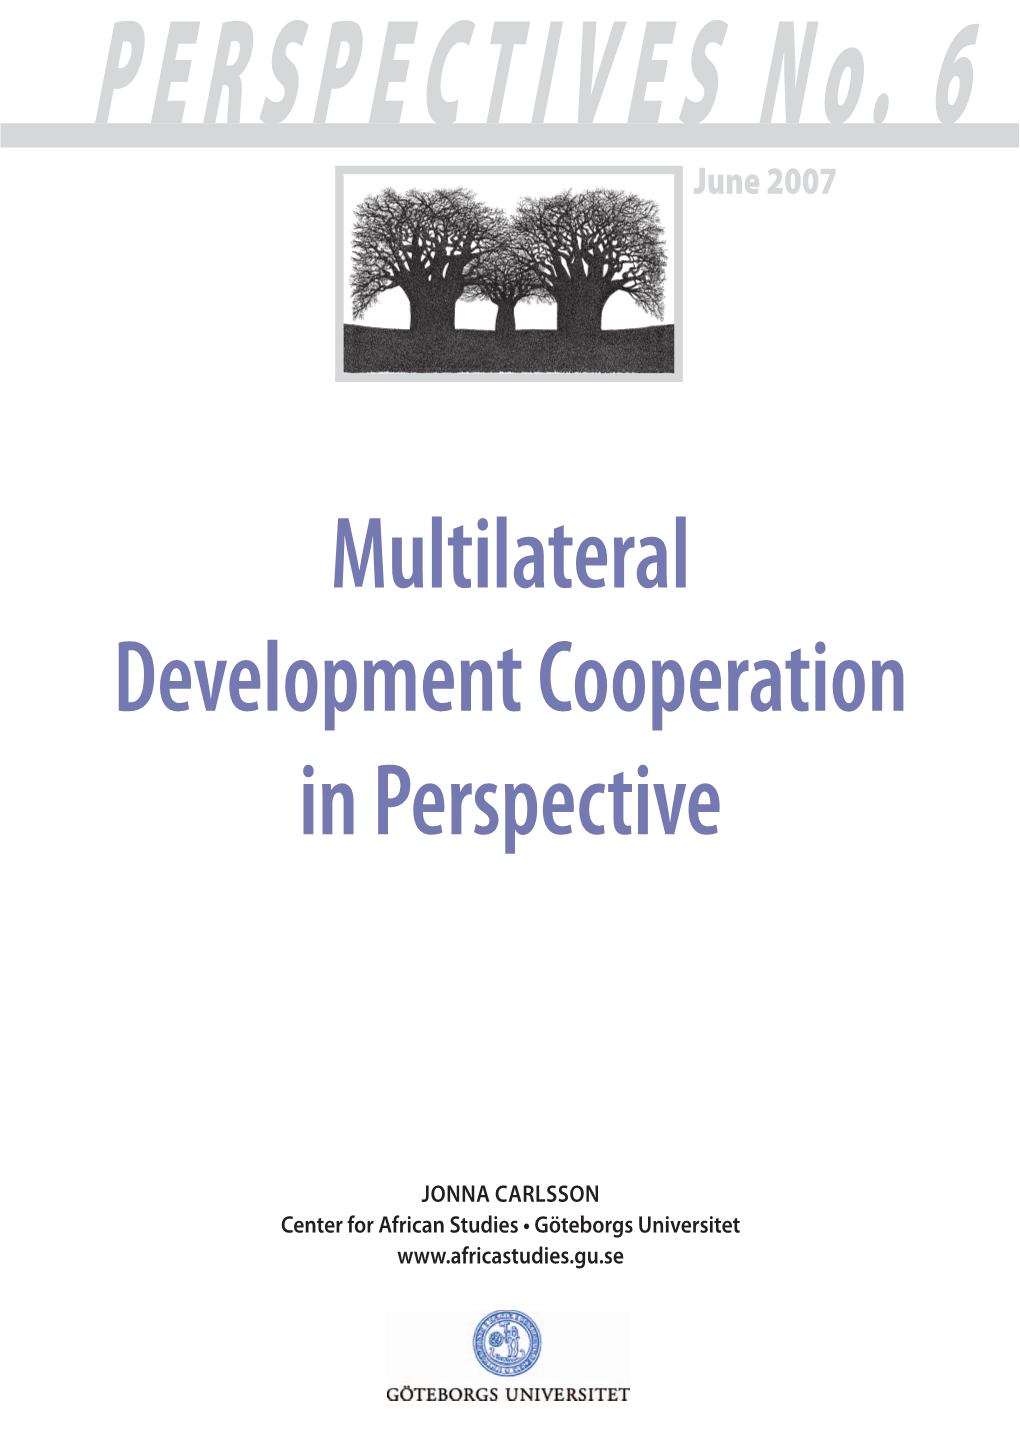 Multilateral Development Cooperation in Perspective